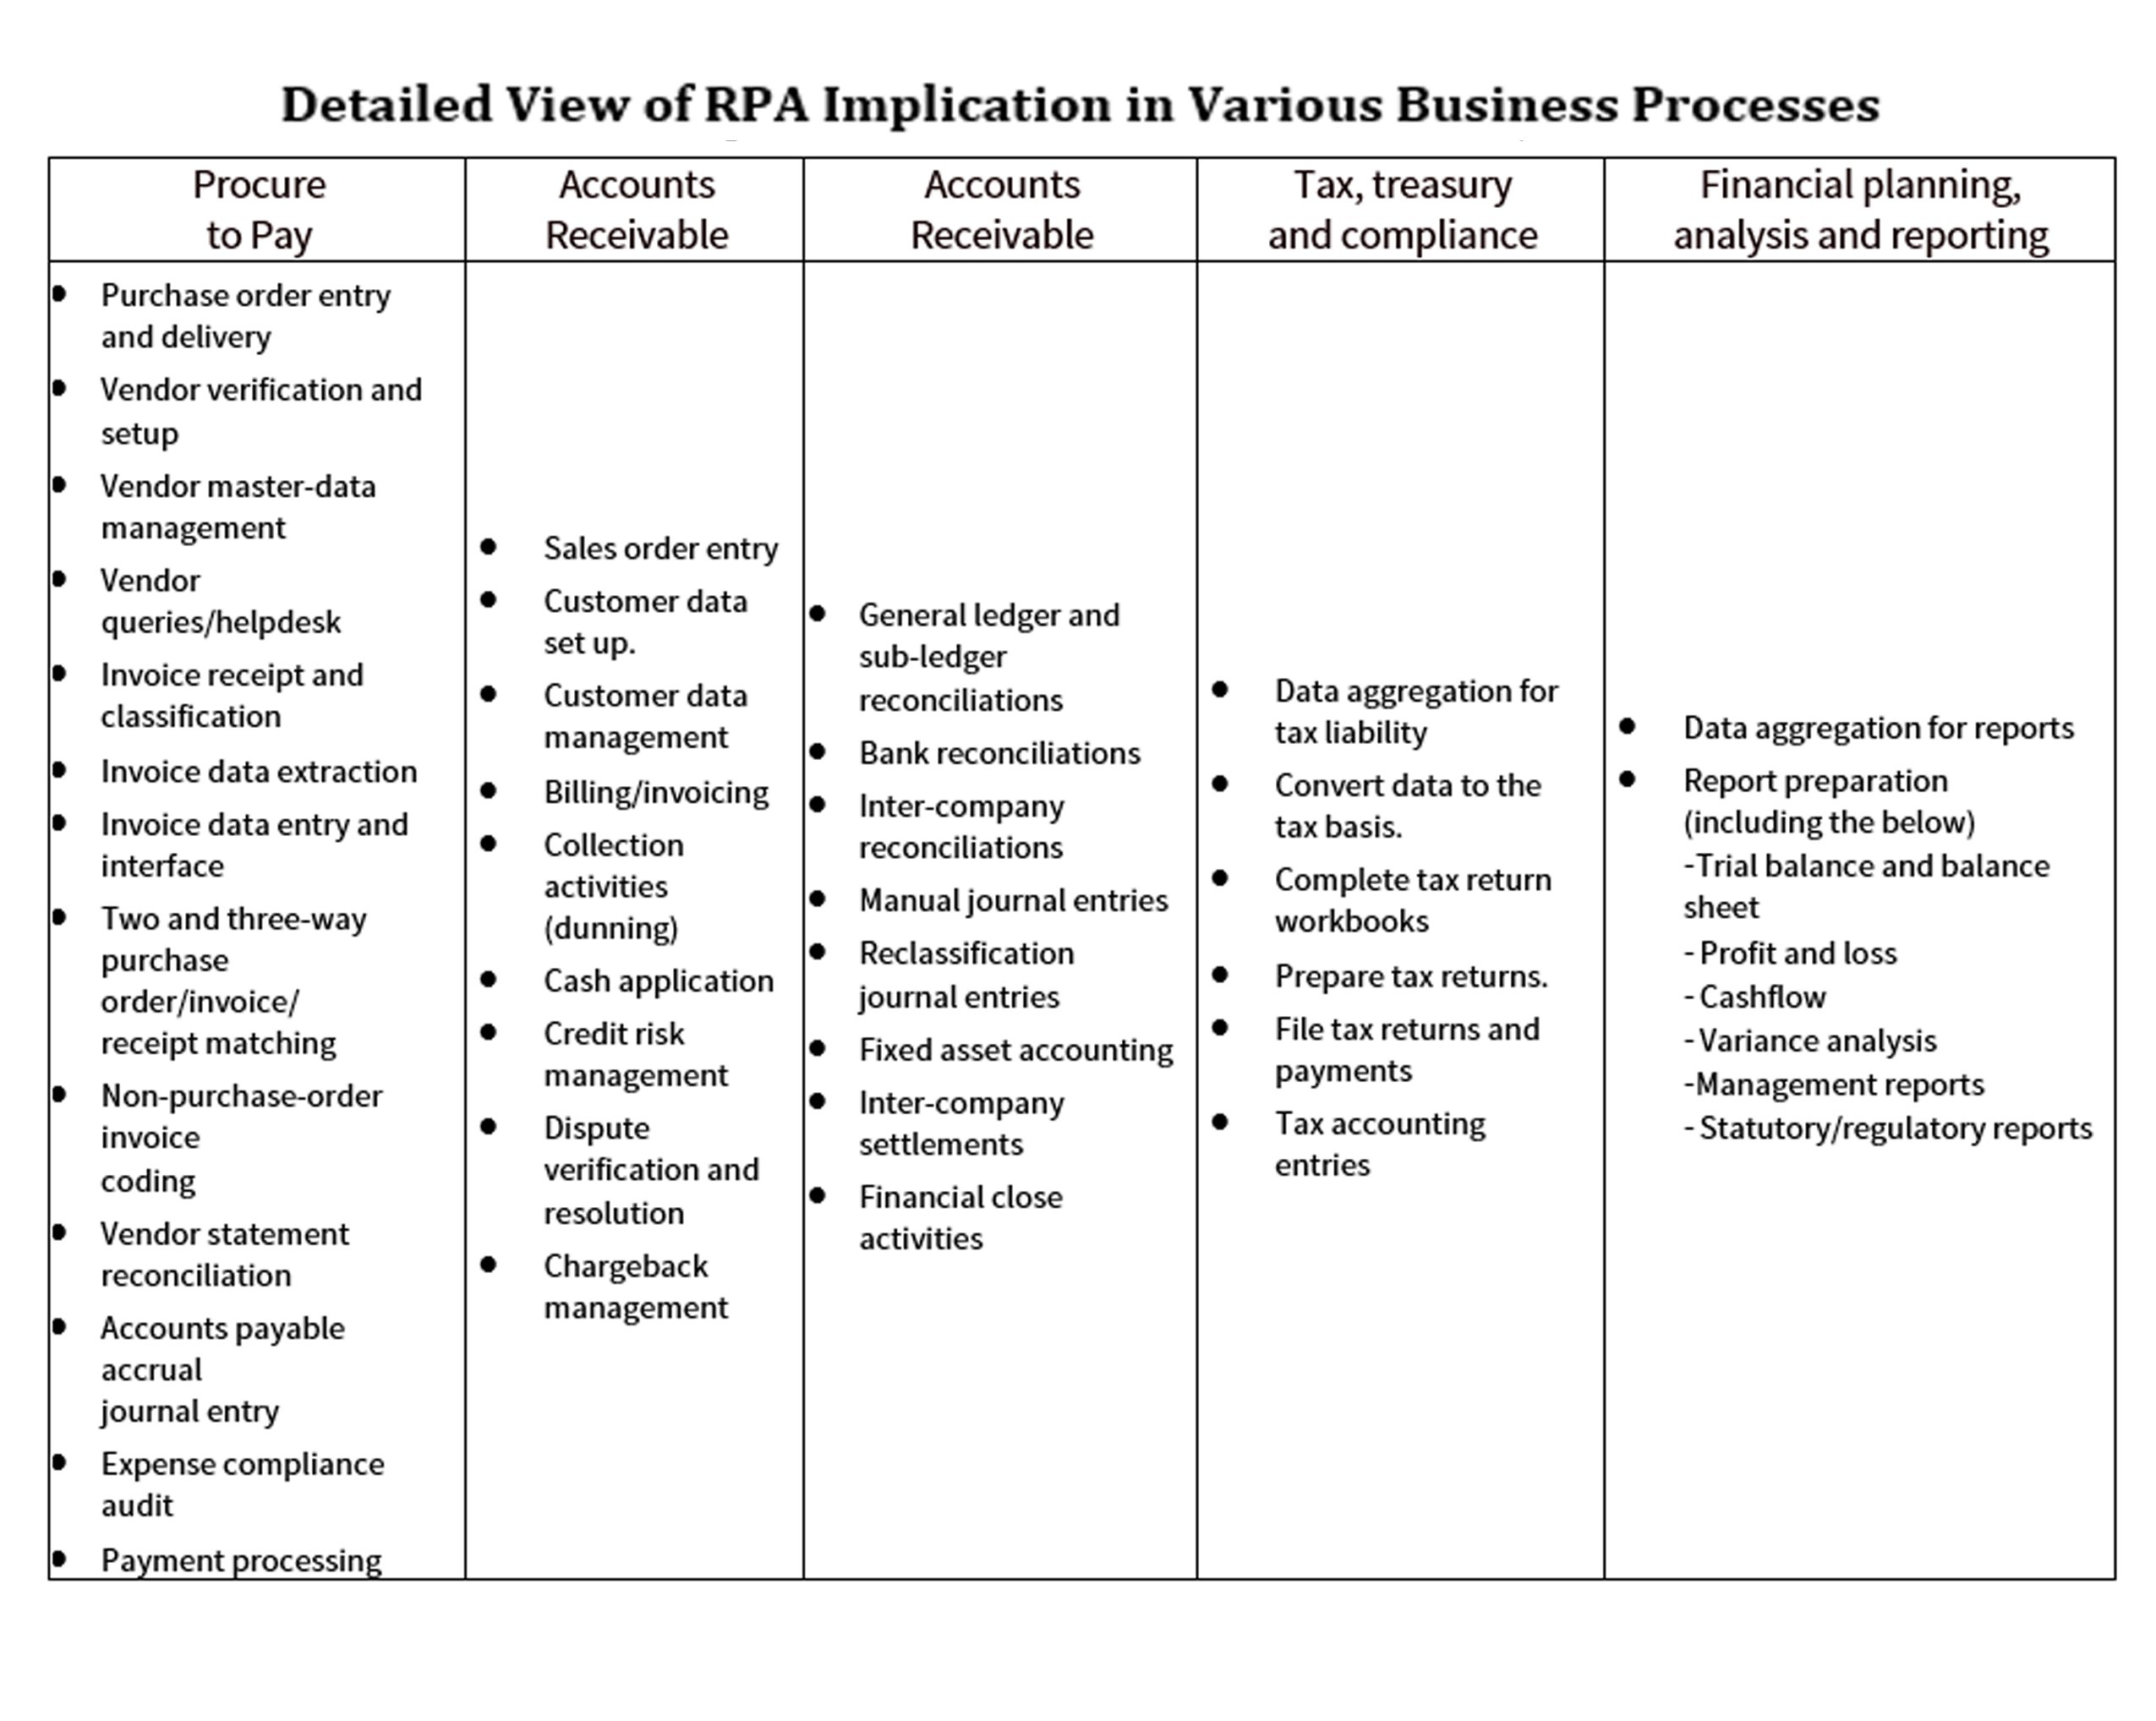 Detailed list of RPA automation of Finance and Accounting activities